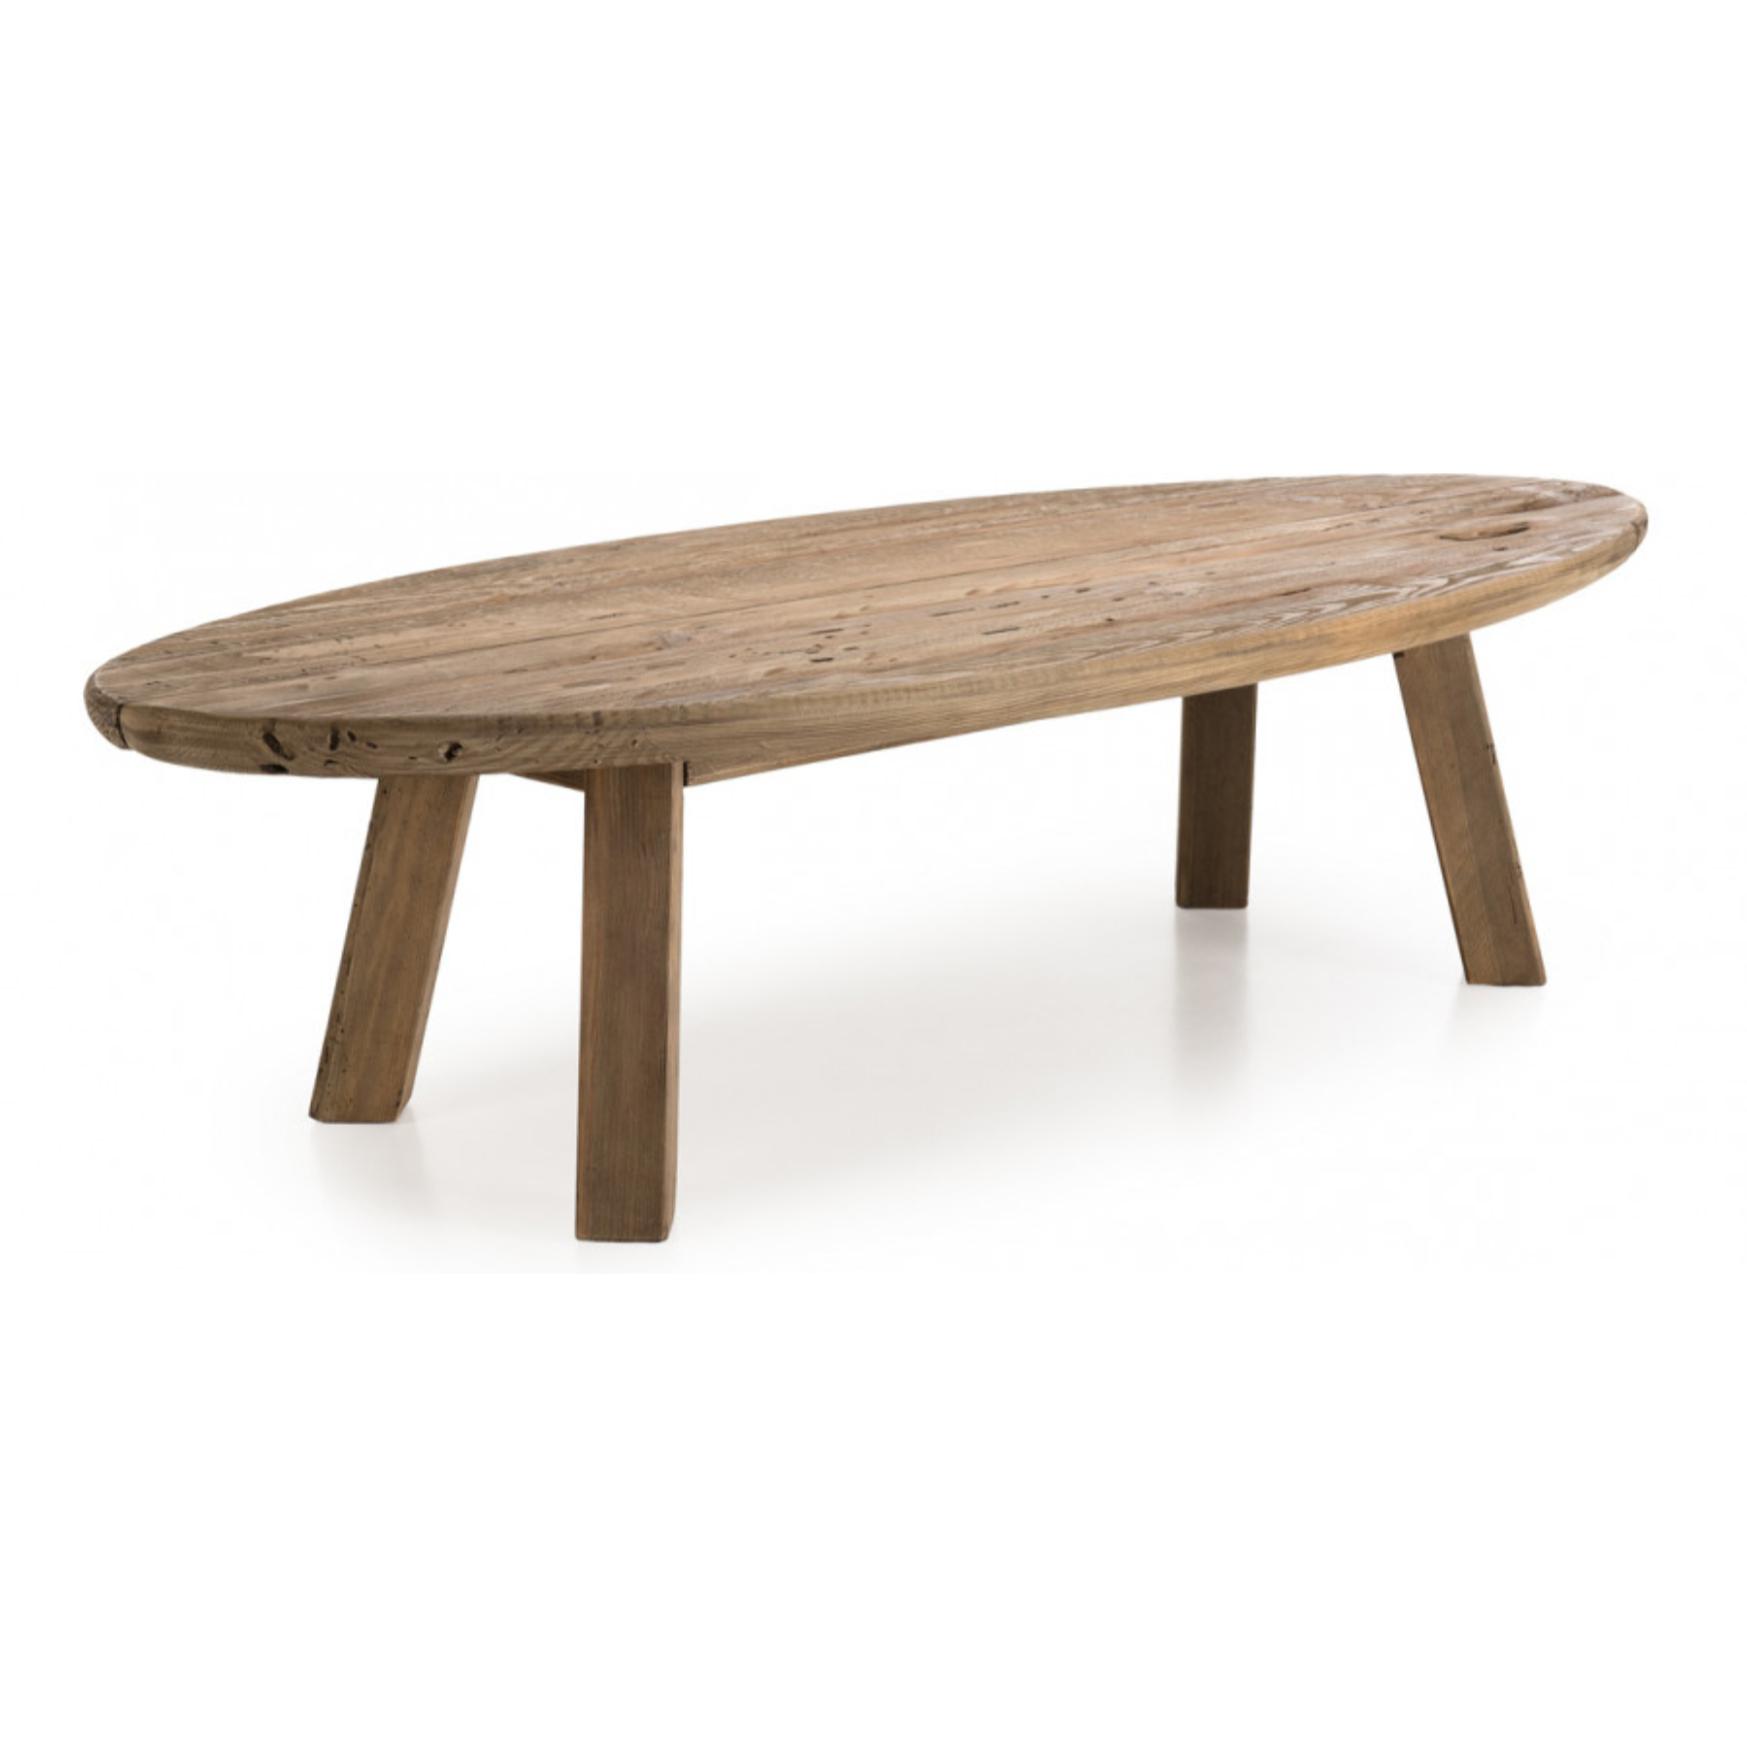 ANDRIAN - Table basse ovale marron bois Pin recyclé